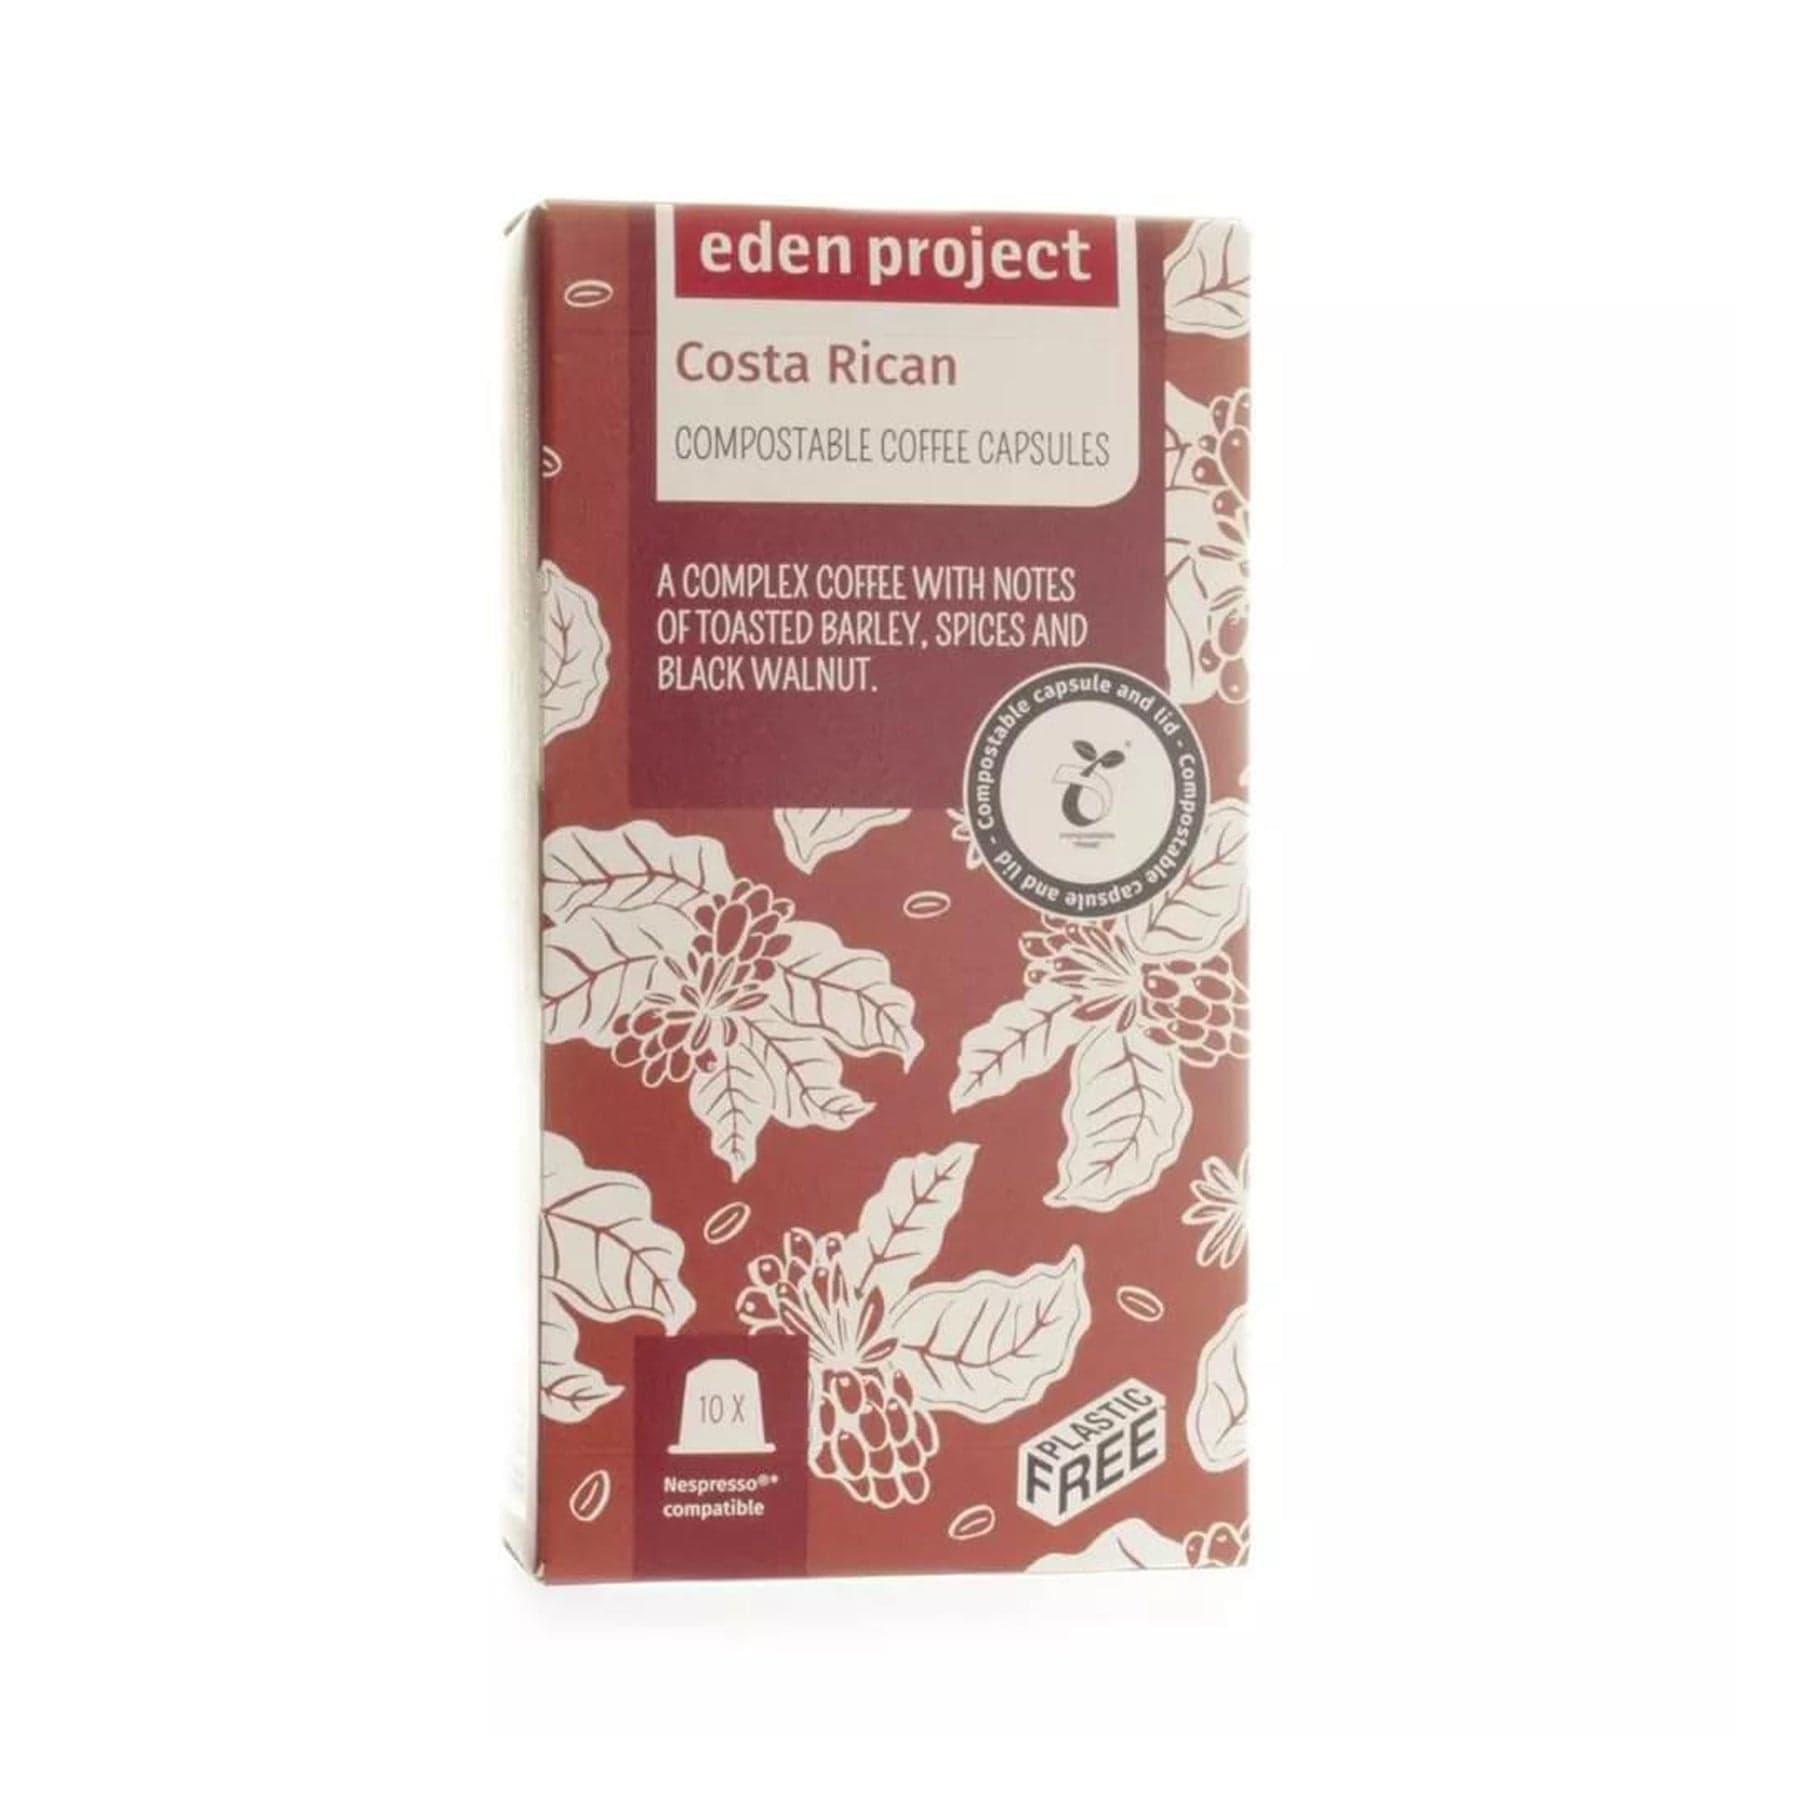 Eden Project Costa Rican compostable coffee capsules packaging, Nespresso compatible, with tasting notes of toasted barley, spices, black walnut, eco-friendly, plastic-free.